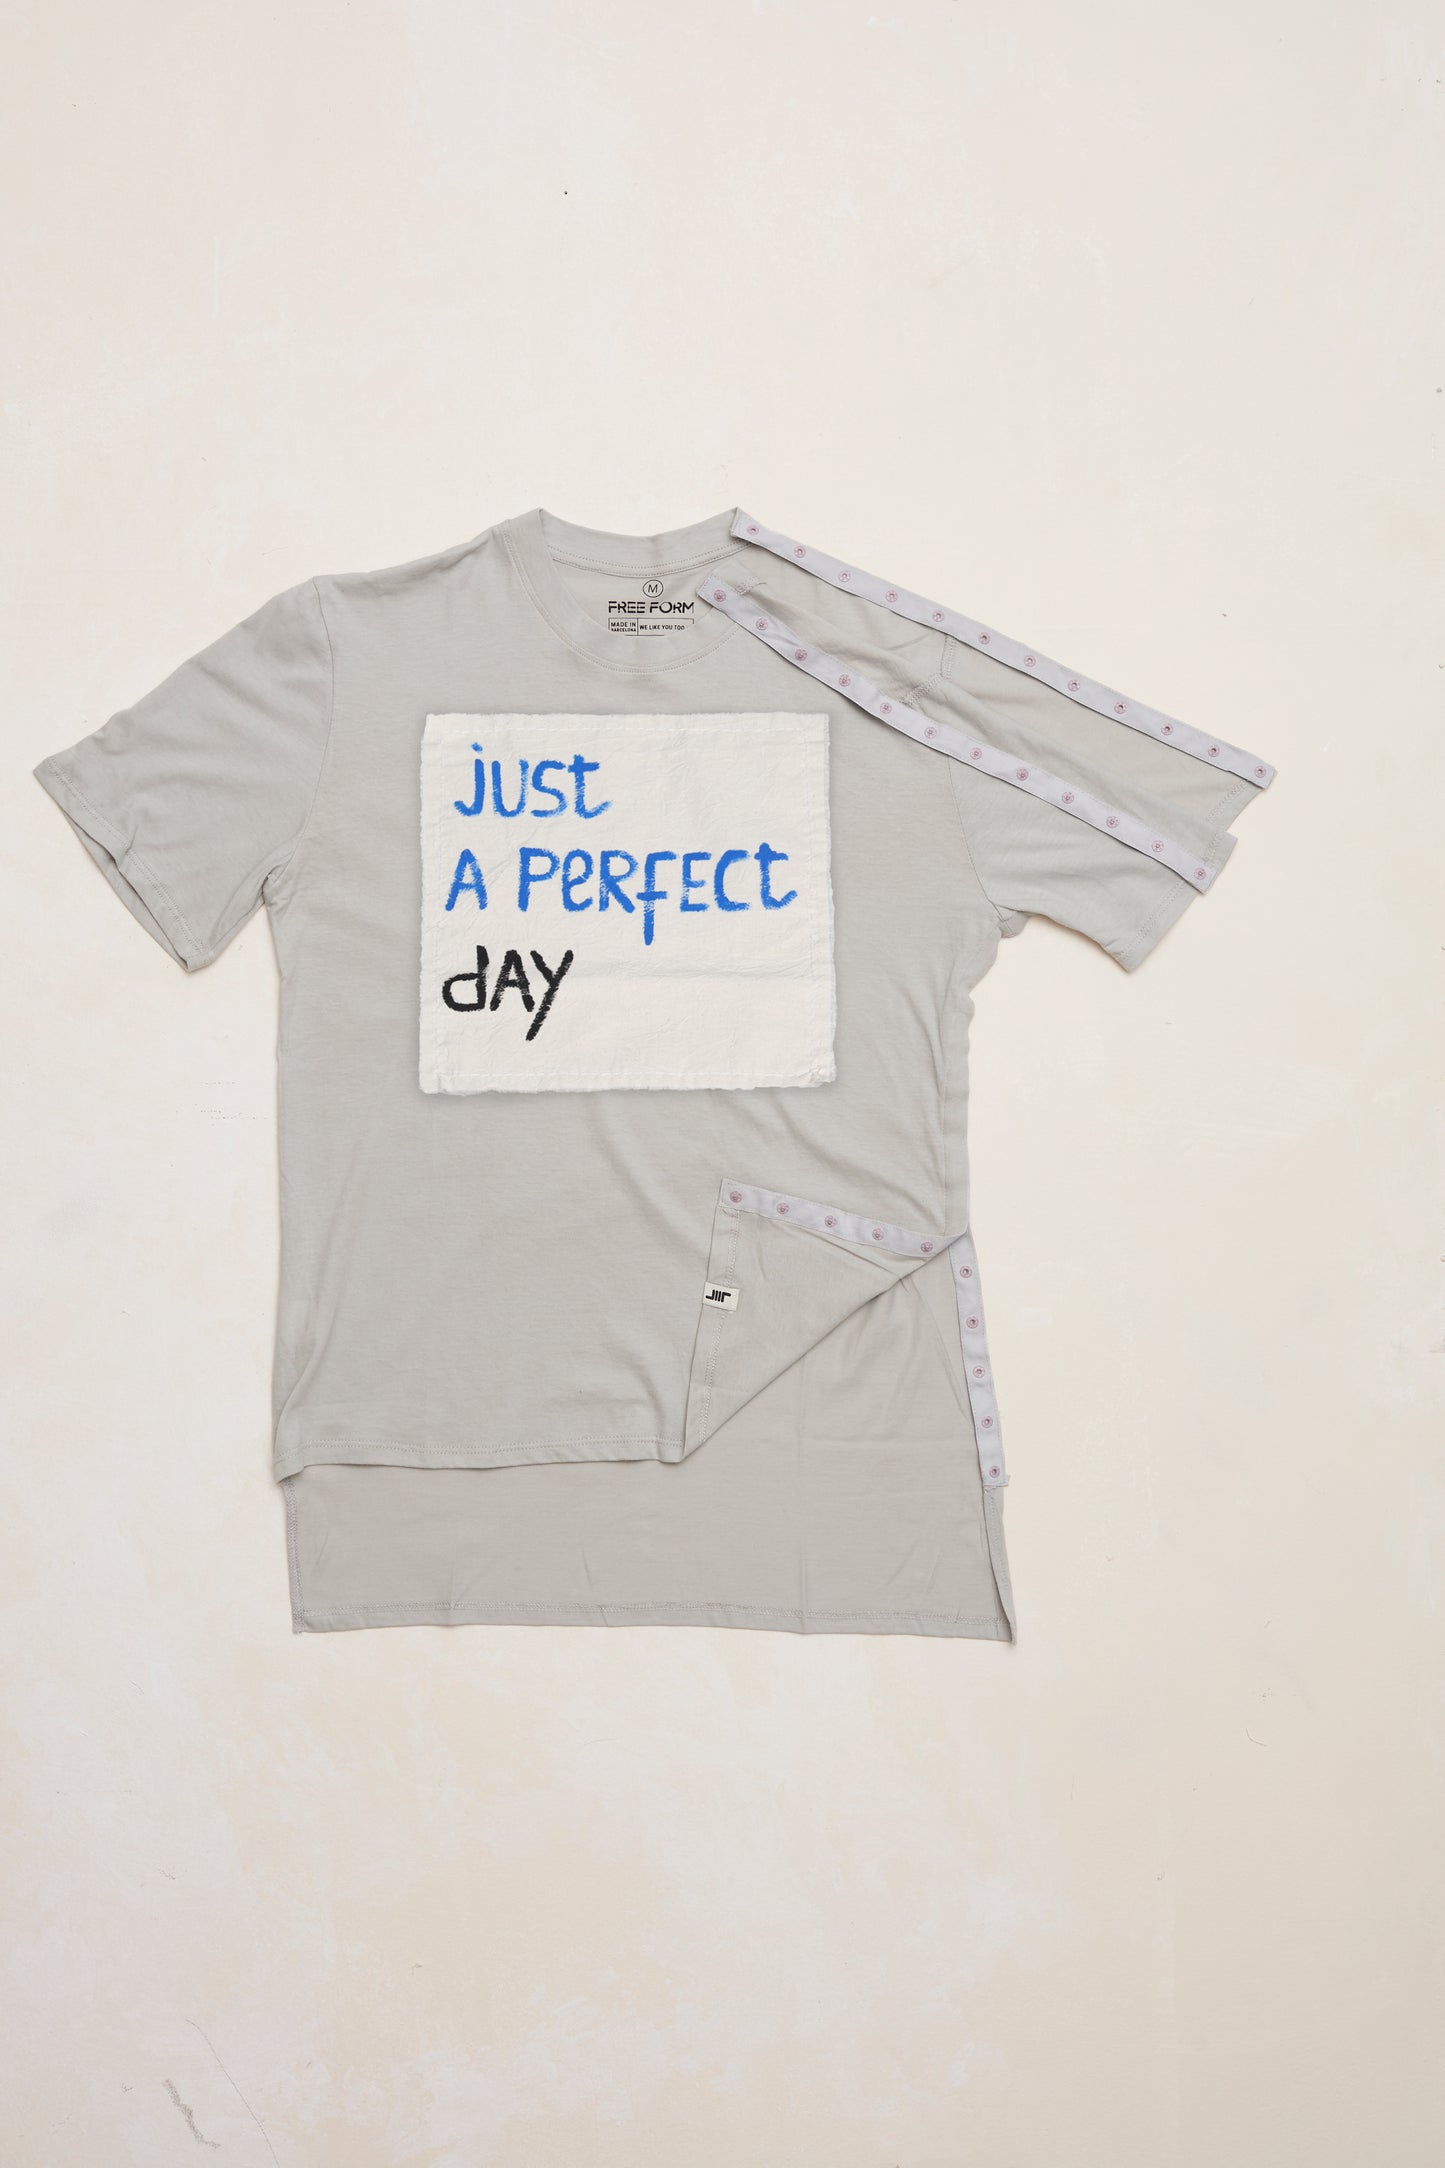 Camiseta FREE FORM STYLE X OSCAR LEON Just a Perfect Day